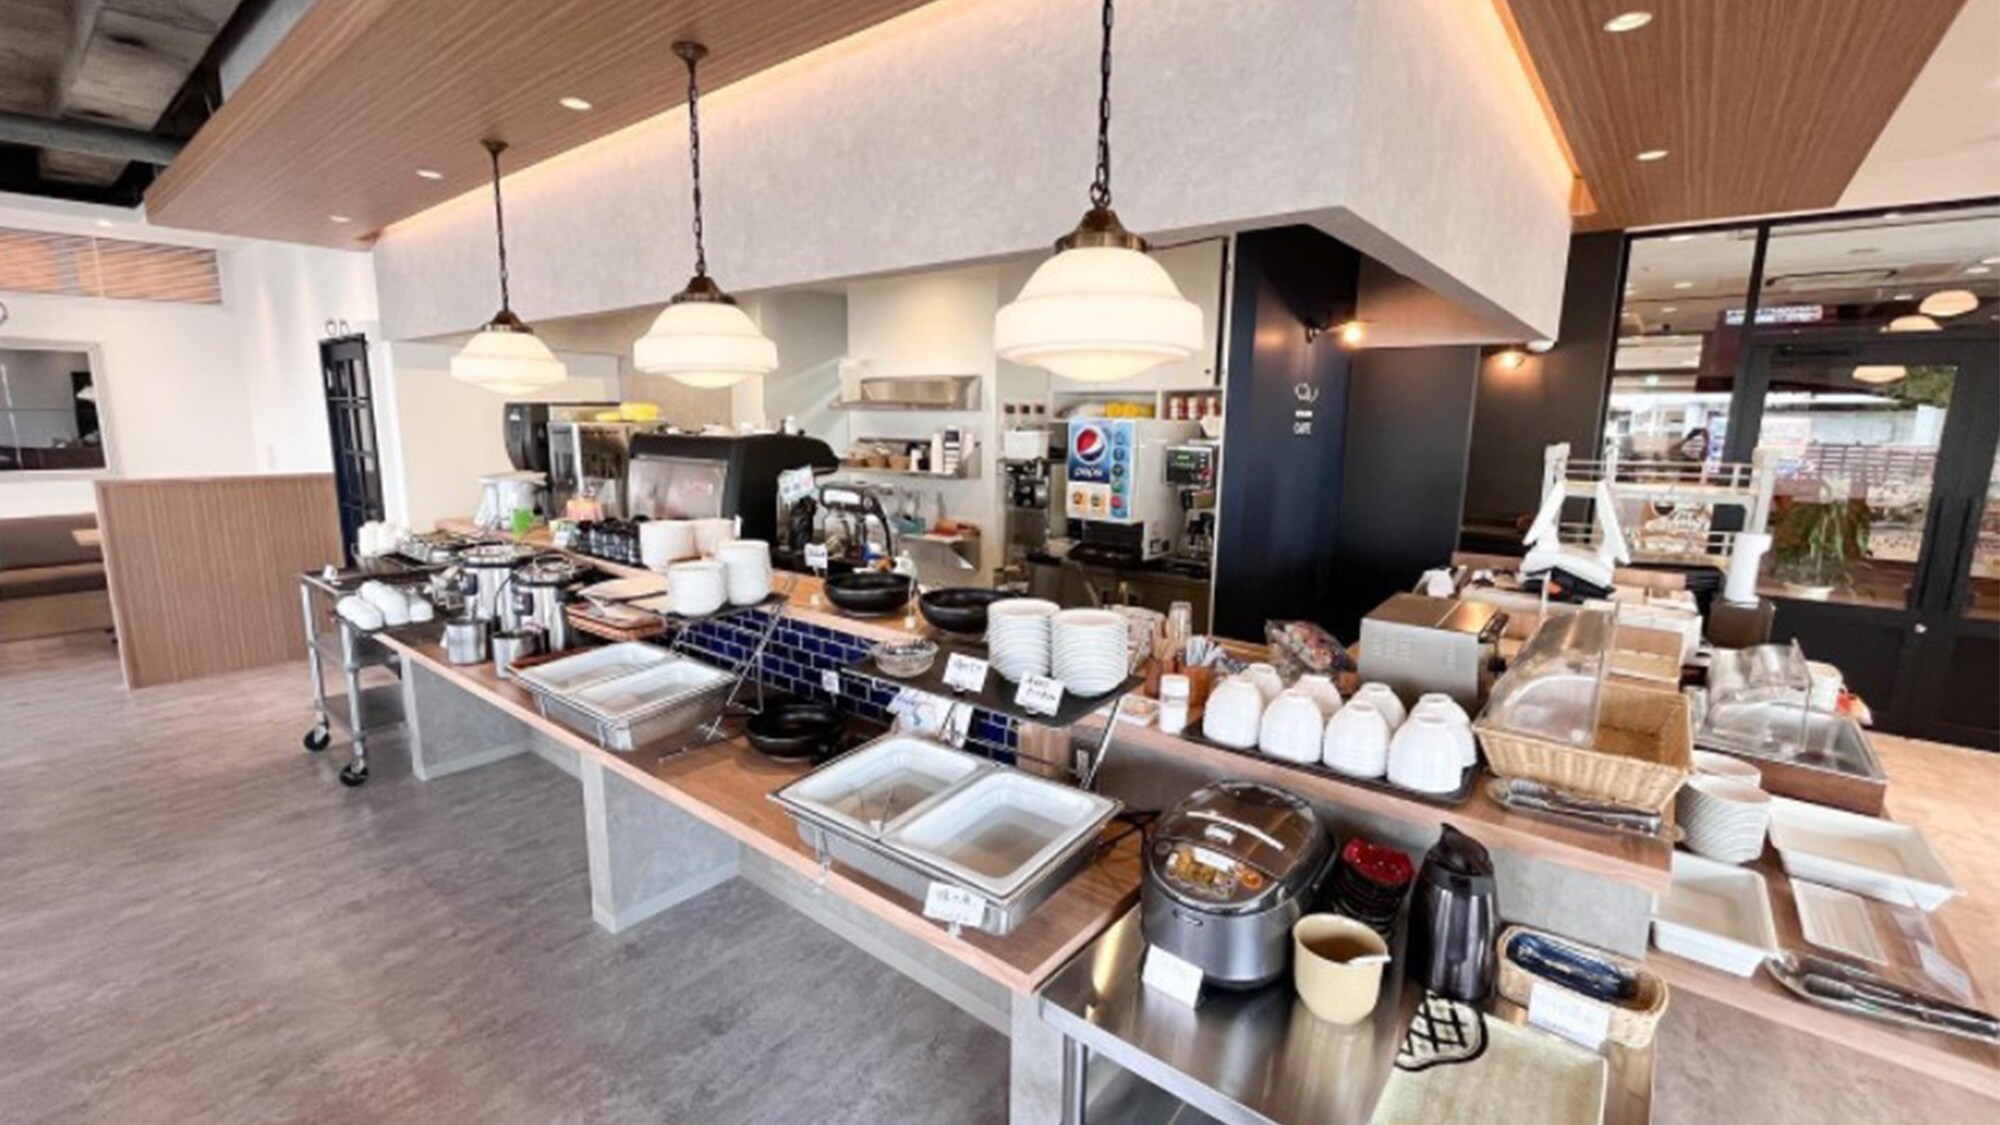 [Renewal of breakfast venue in March 2022] Miyajima Cafe on the 1st floor of the hotel